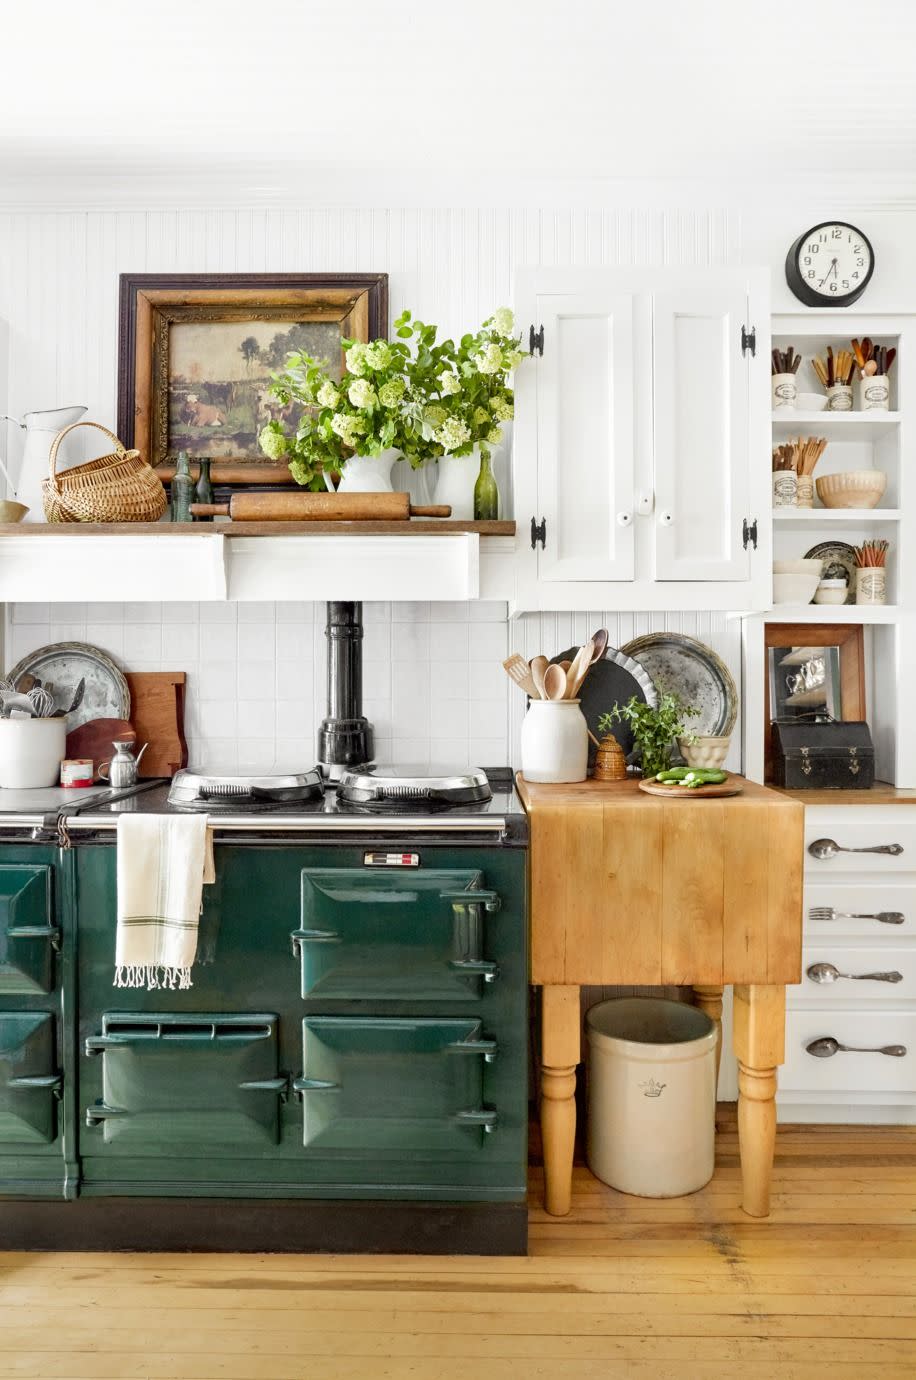 white kitchen with green aga stove, crocks filled with cutlery and kitchen utensil